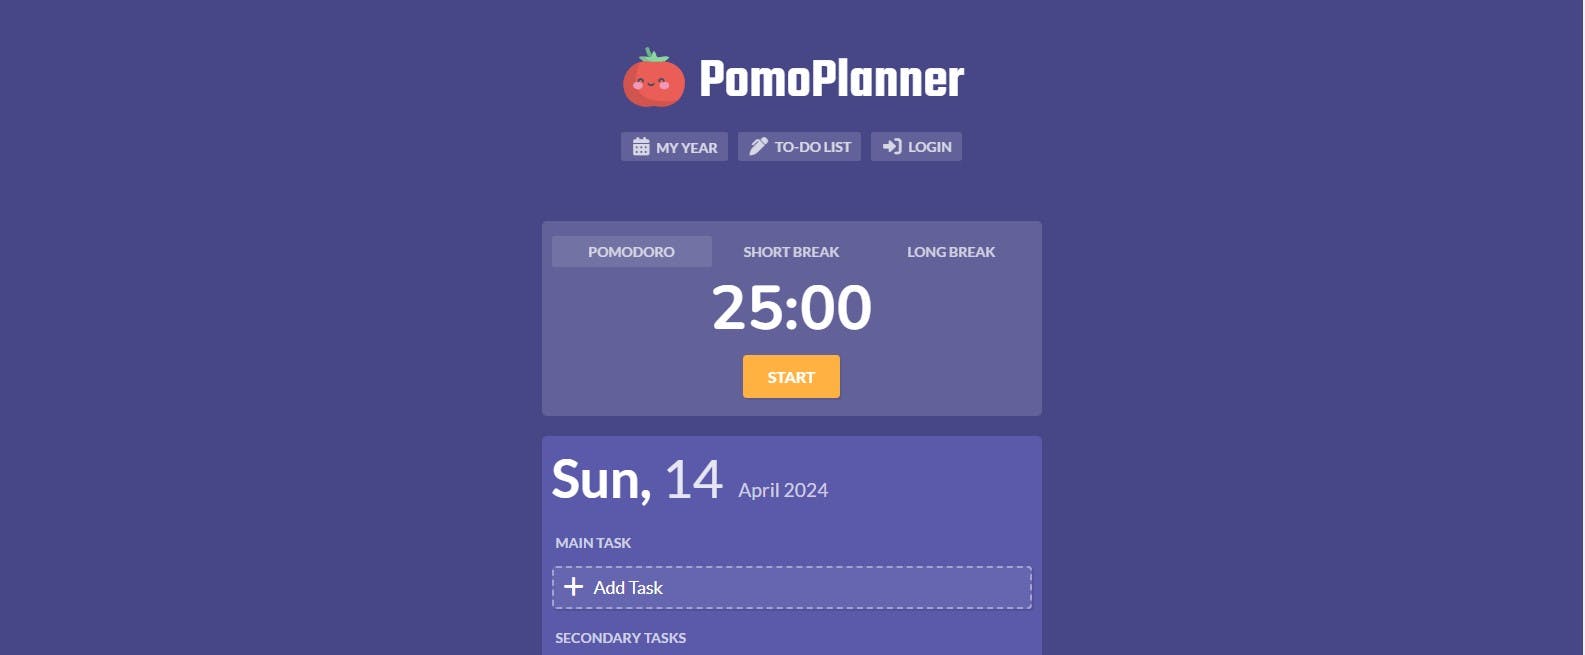 PomoPlanner.app - Simplified Pomodoro timer tool for effective time management.